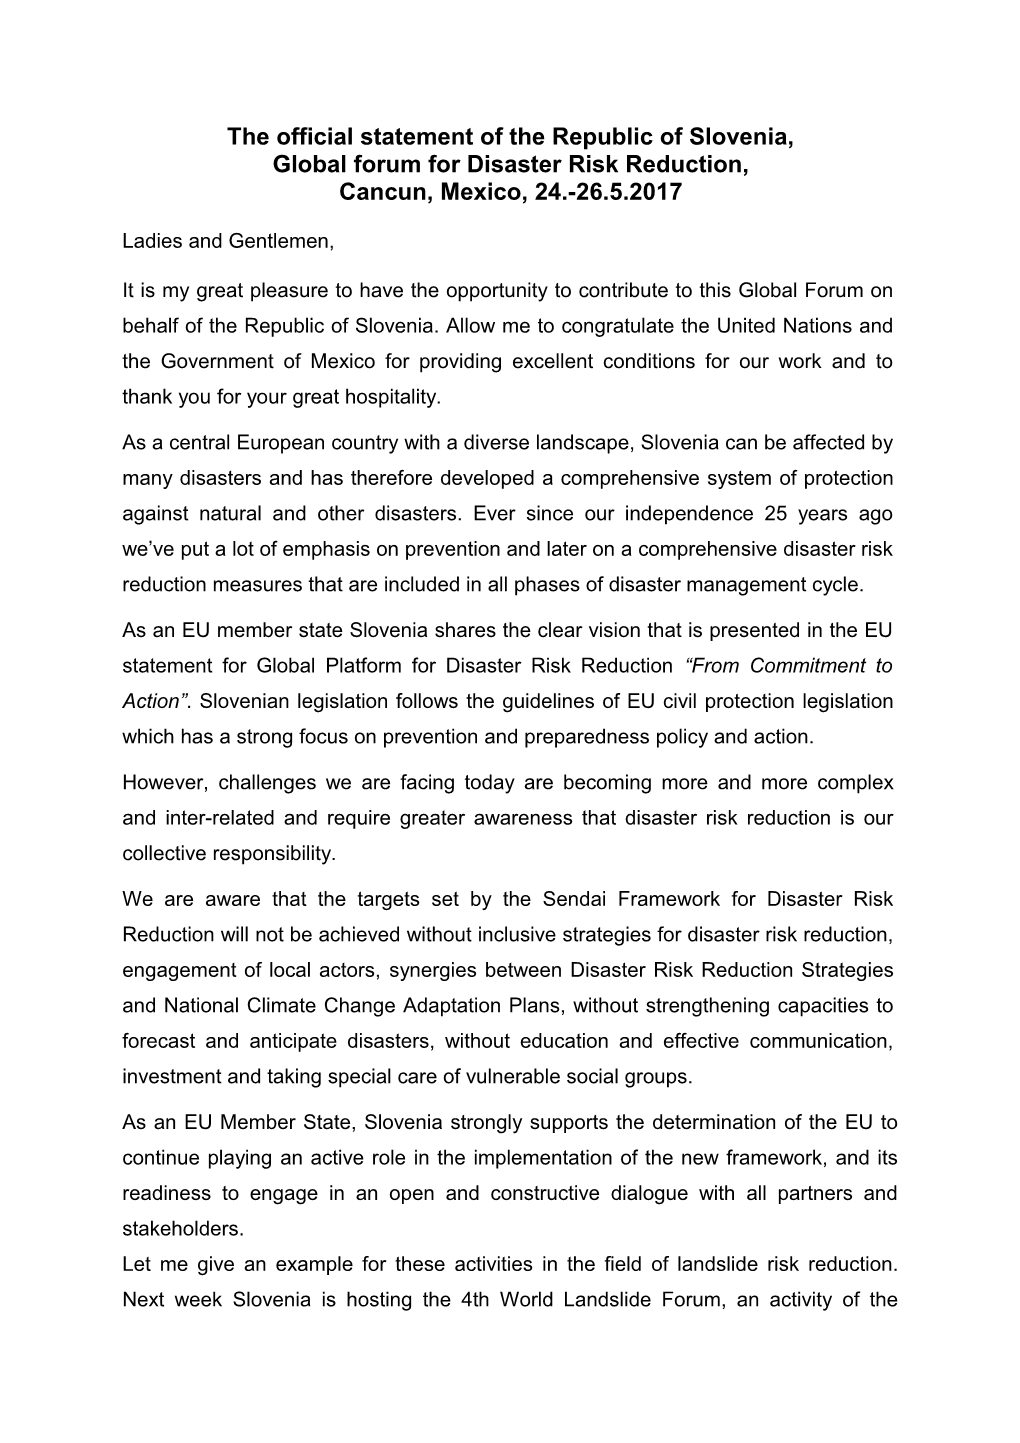 The Official Statement of the Republic of Slovenia, Global Forum for Disaster Risk Reduction